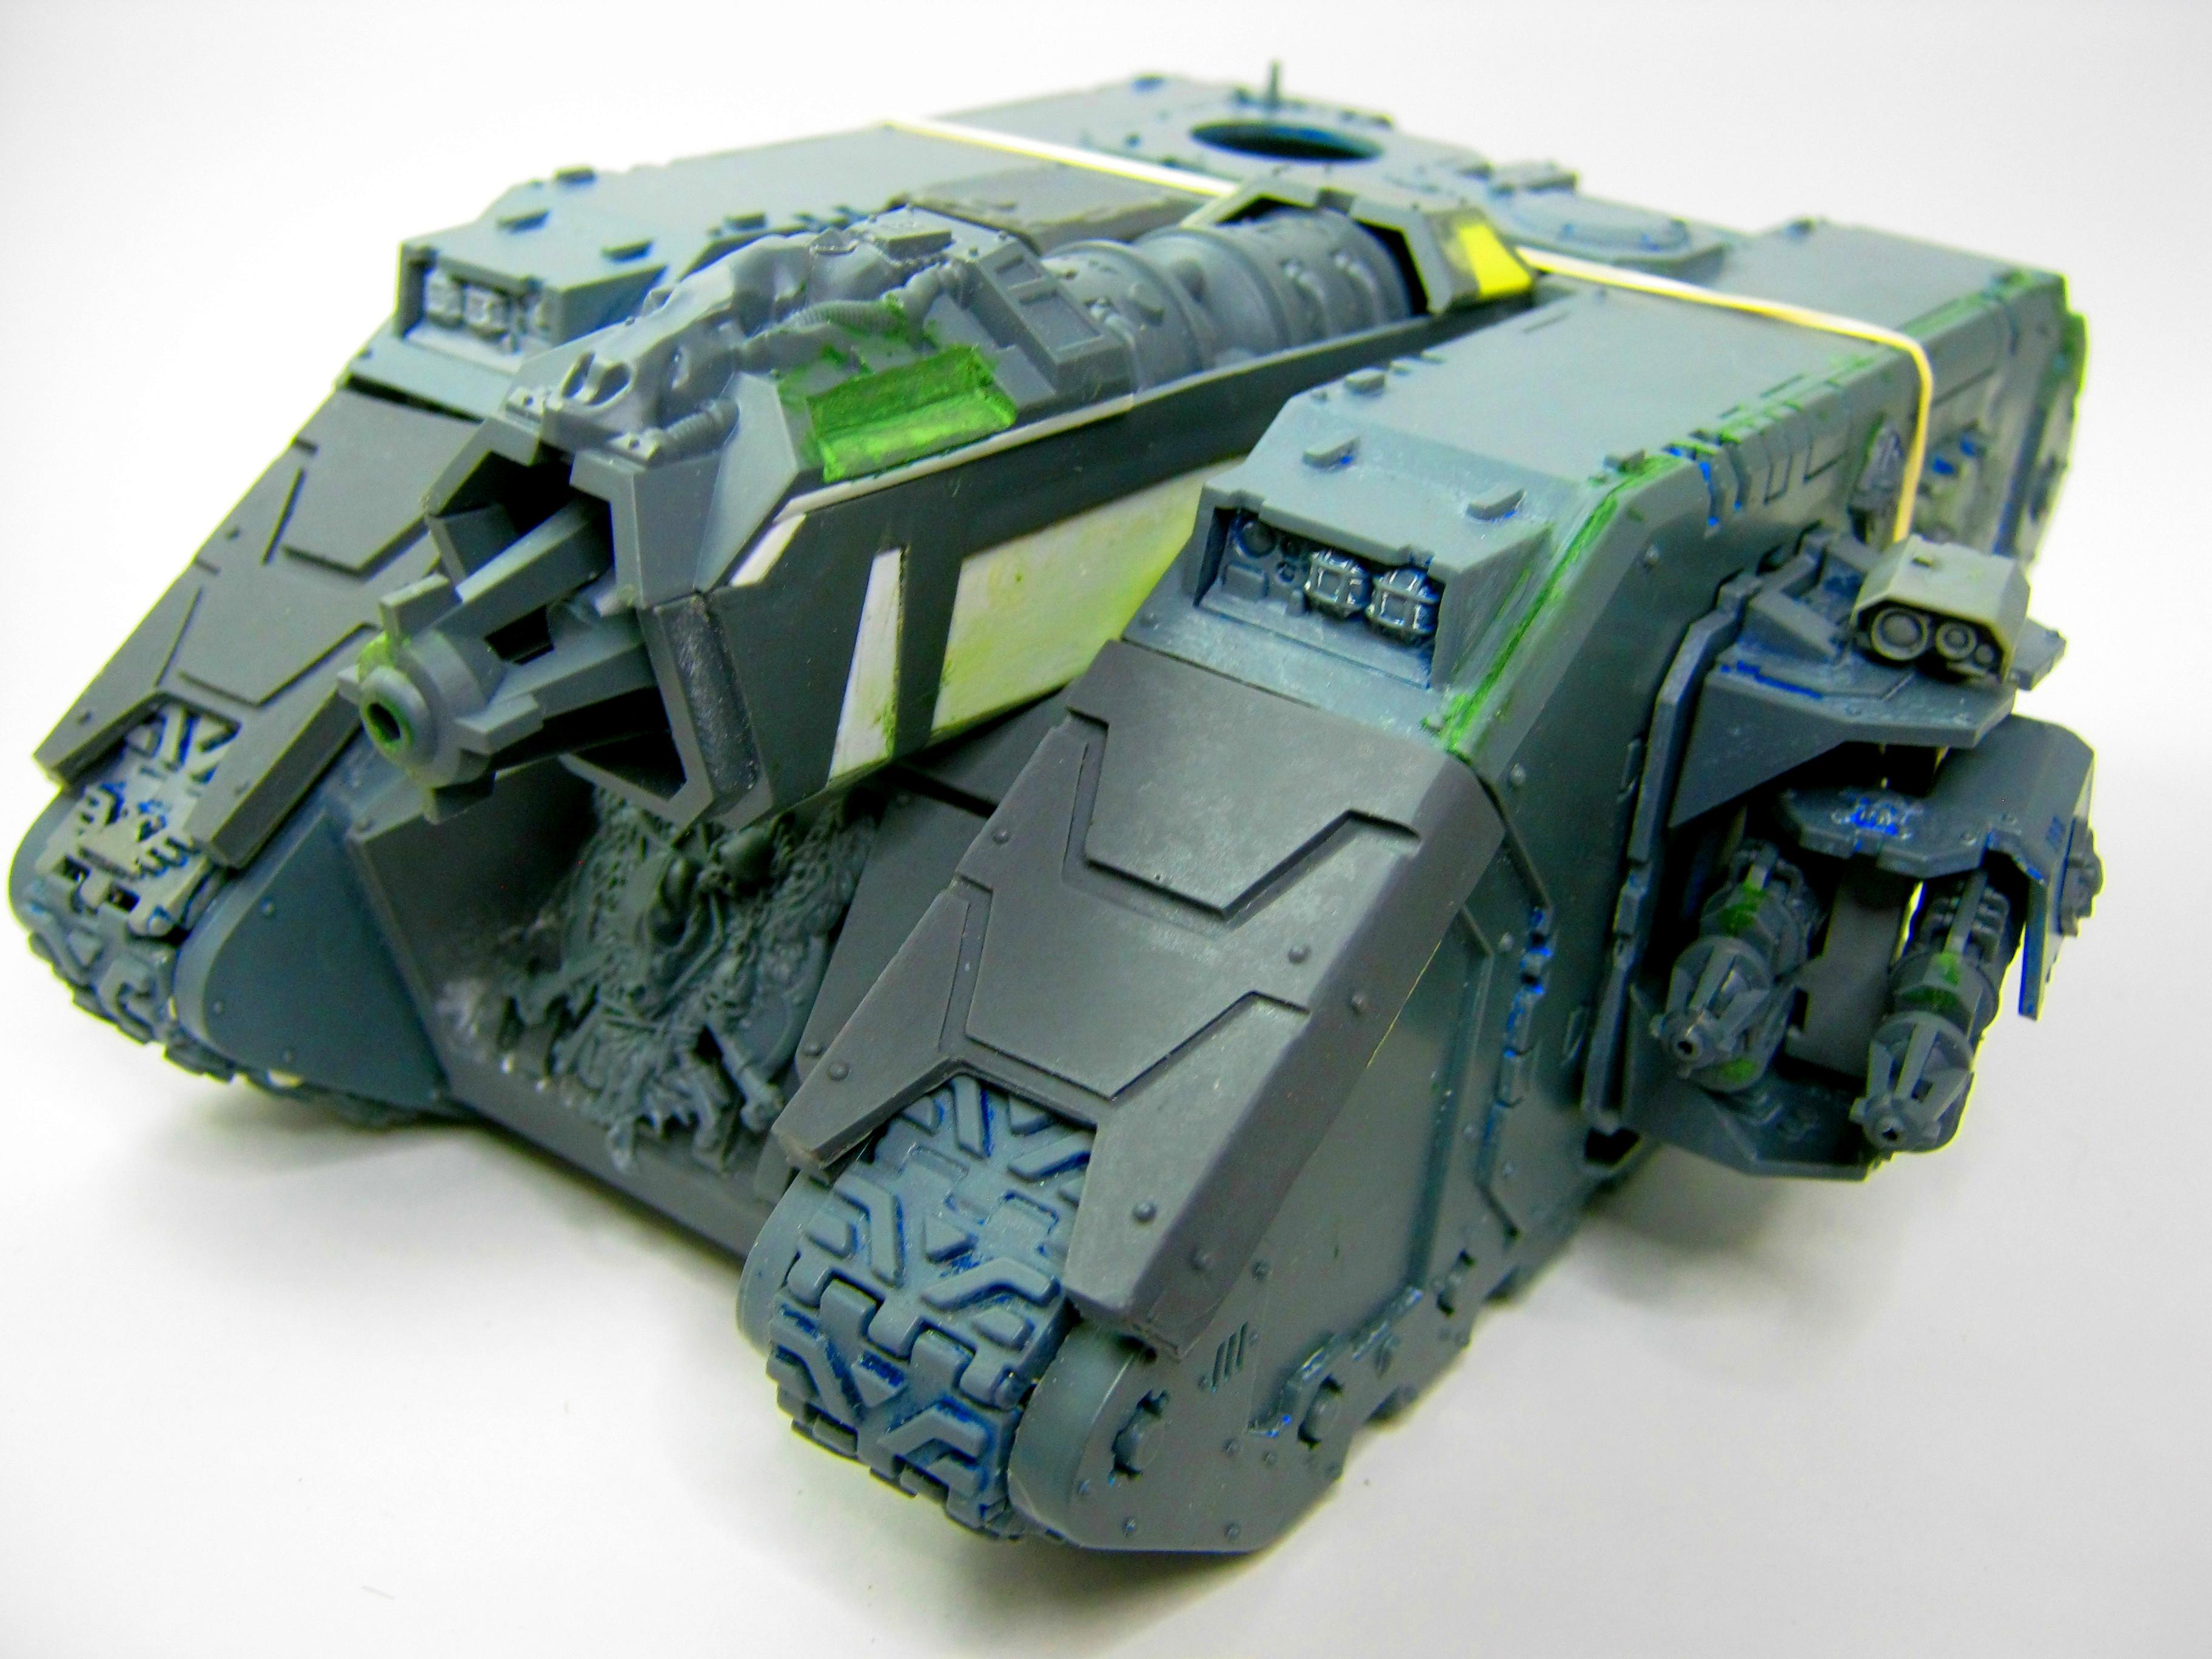 Achilles, Conversion, Hellfrost, Kitbash, Land Raider, Space Marines, Space Wolves, Stormfang